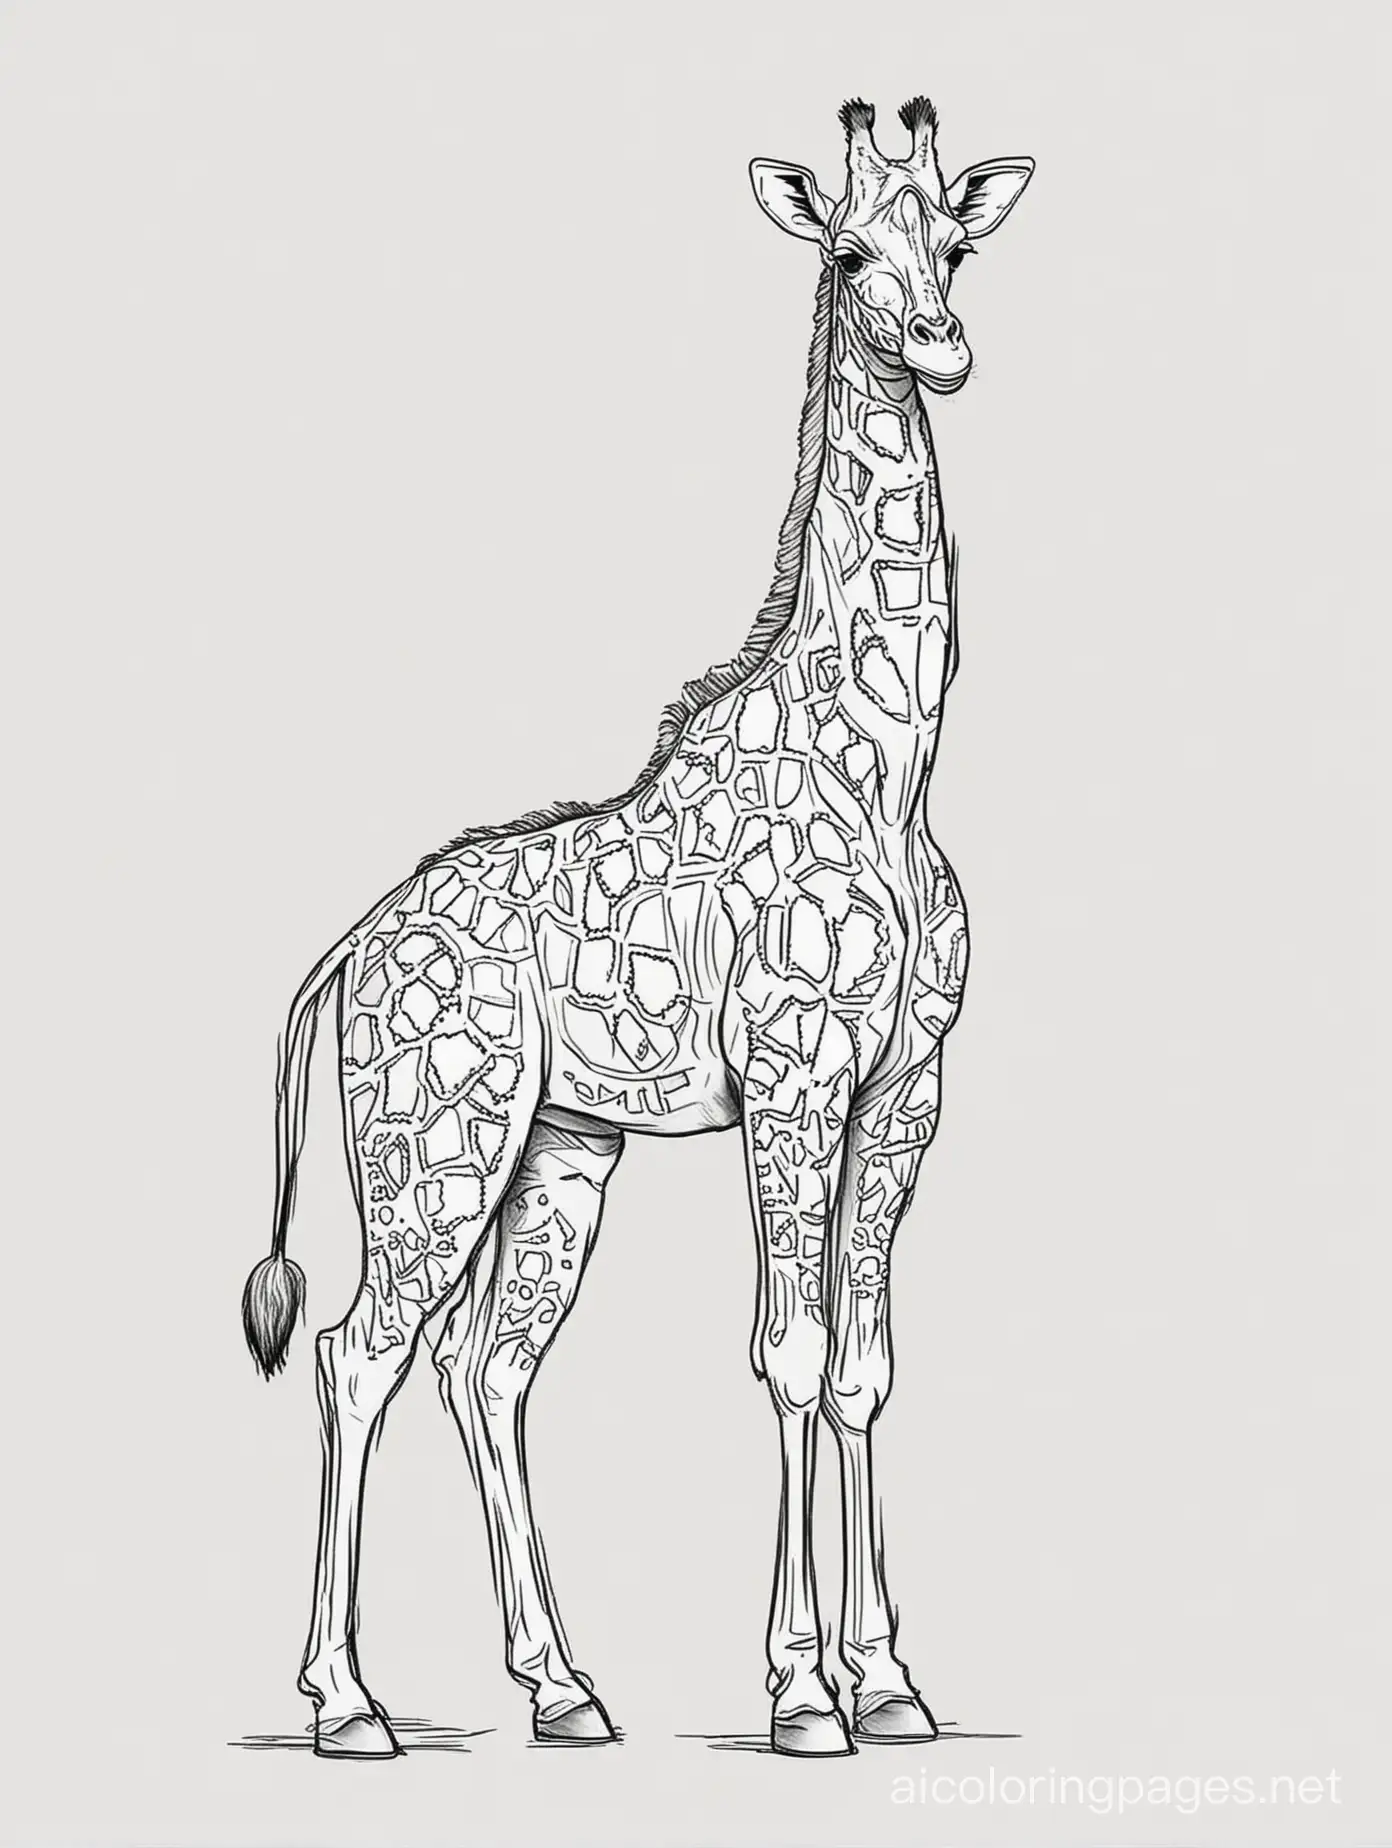 Giraffe-Coloring-Page-Simple-Line-Art-on-White-Background